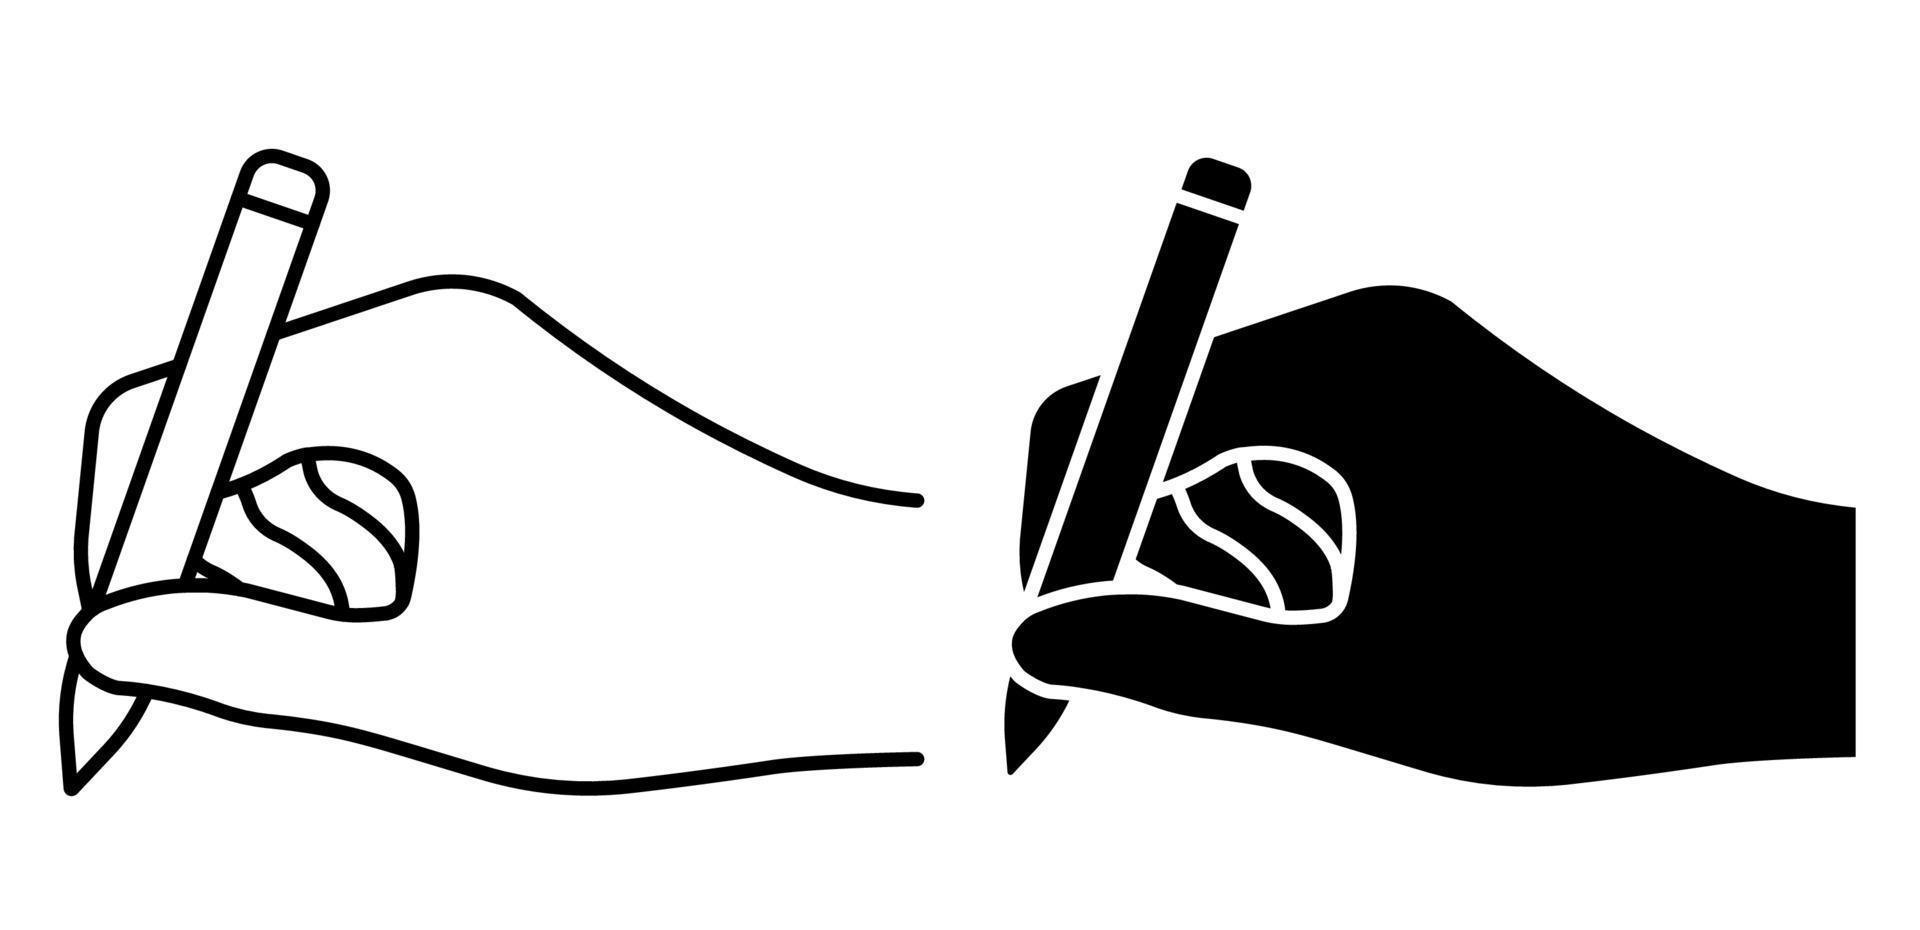 Linear icon. Ballpoint pen in hand of author. Signature on paper from writer or artist. Simple black and white vector isolated on white background